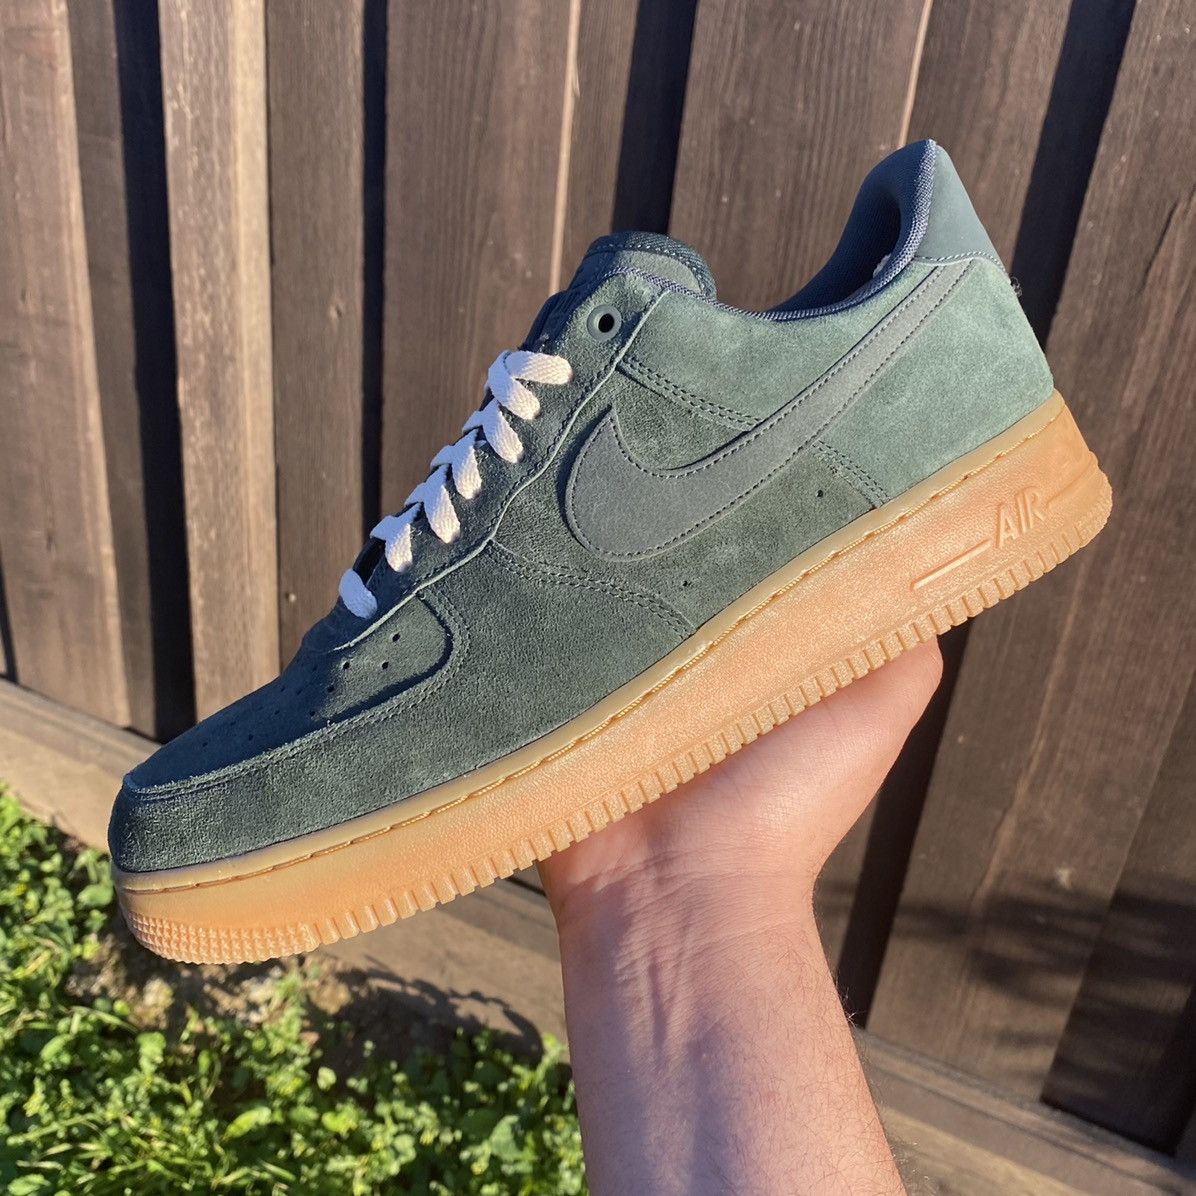 NIKE AIR FORCE 1 LOW 07 LV8 SUEDE SZ 11 OUTDOOR GREEN GUM BOTTOM AA1117 300  